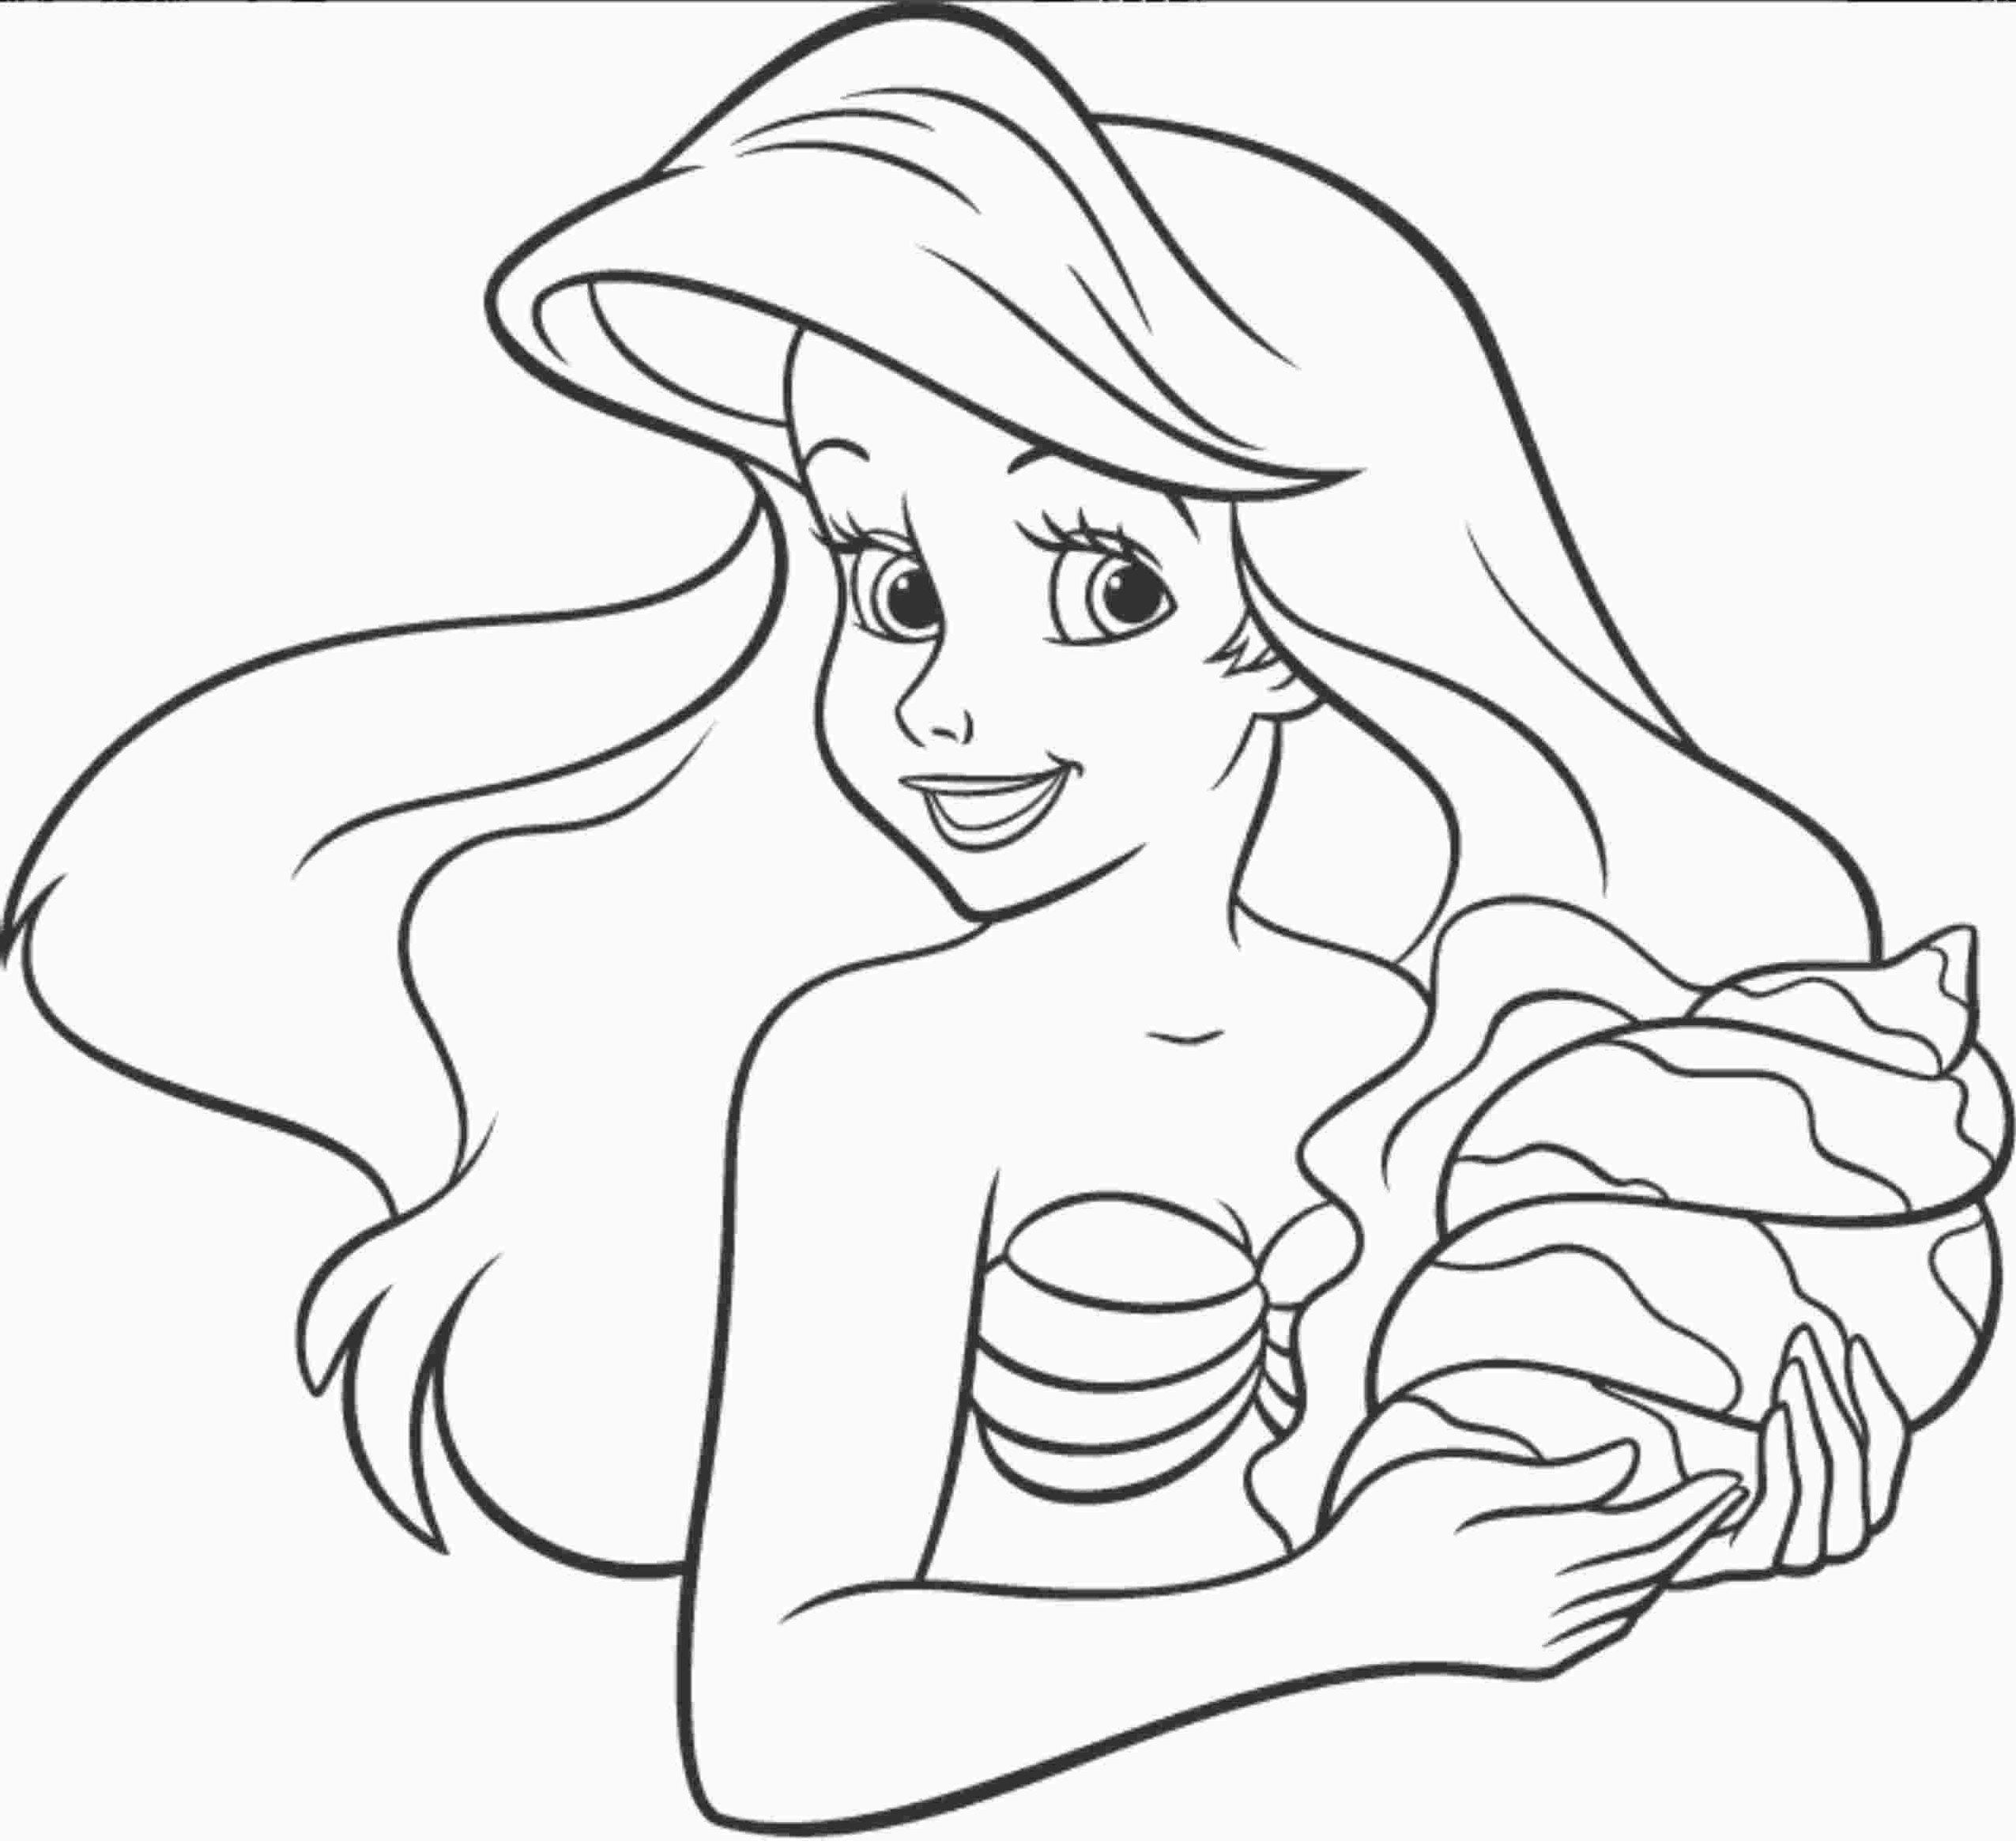 Ursula Little Mermaid Coloring Pages - Coloring Home